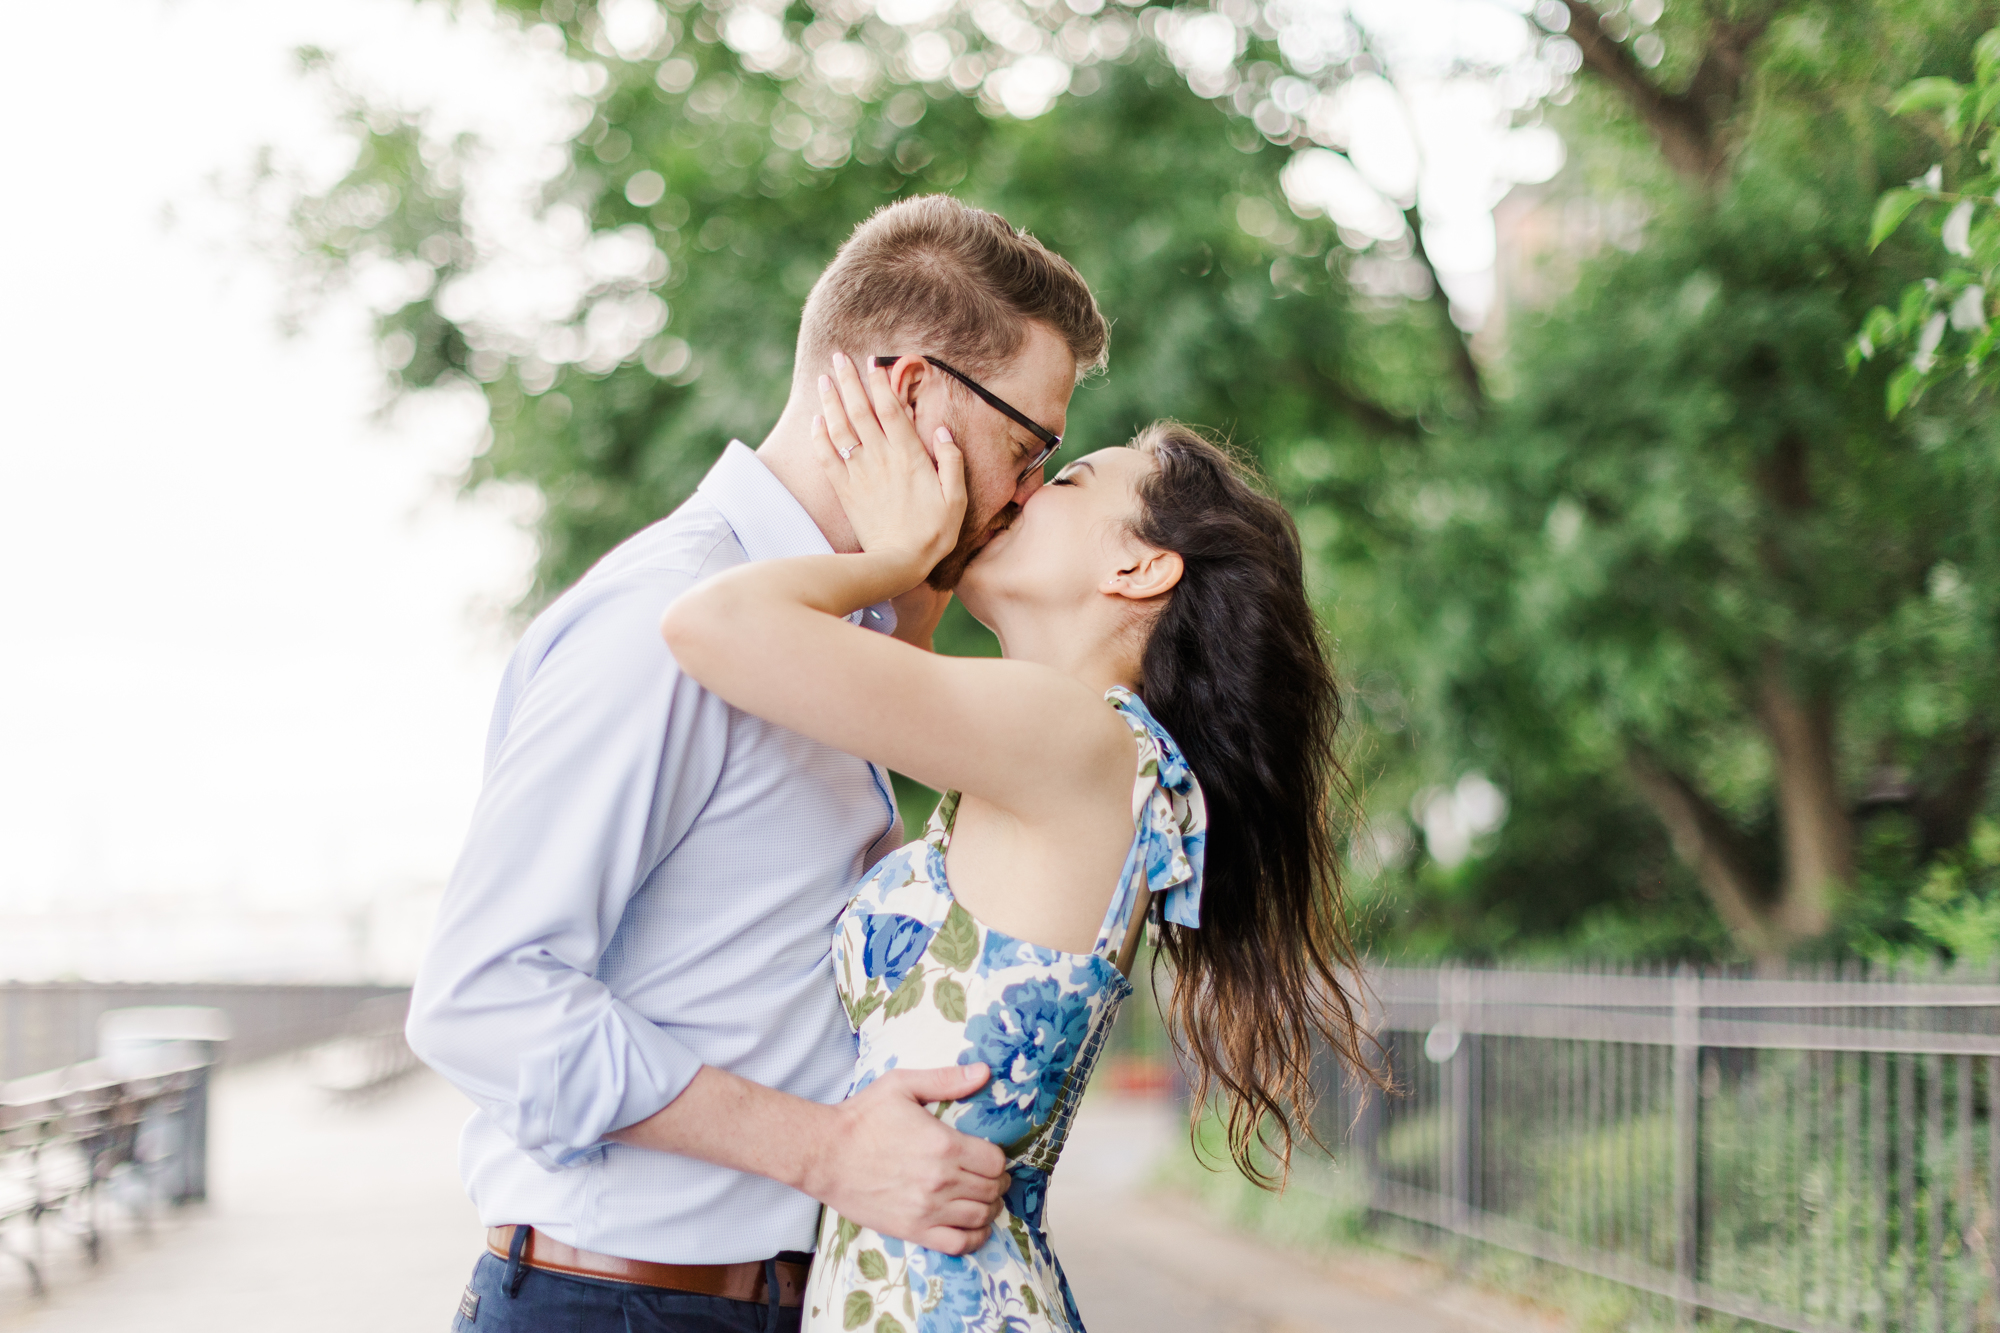 Intimate Engagement Photos in Brooklyn Heights